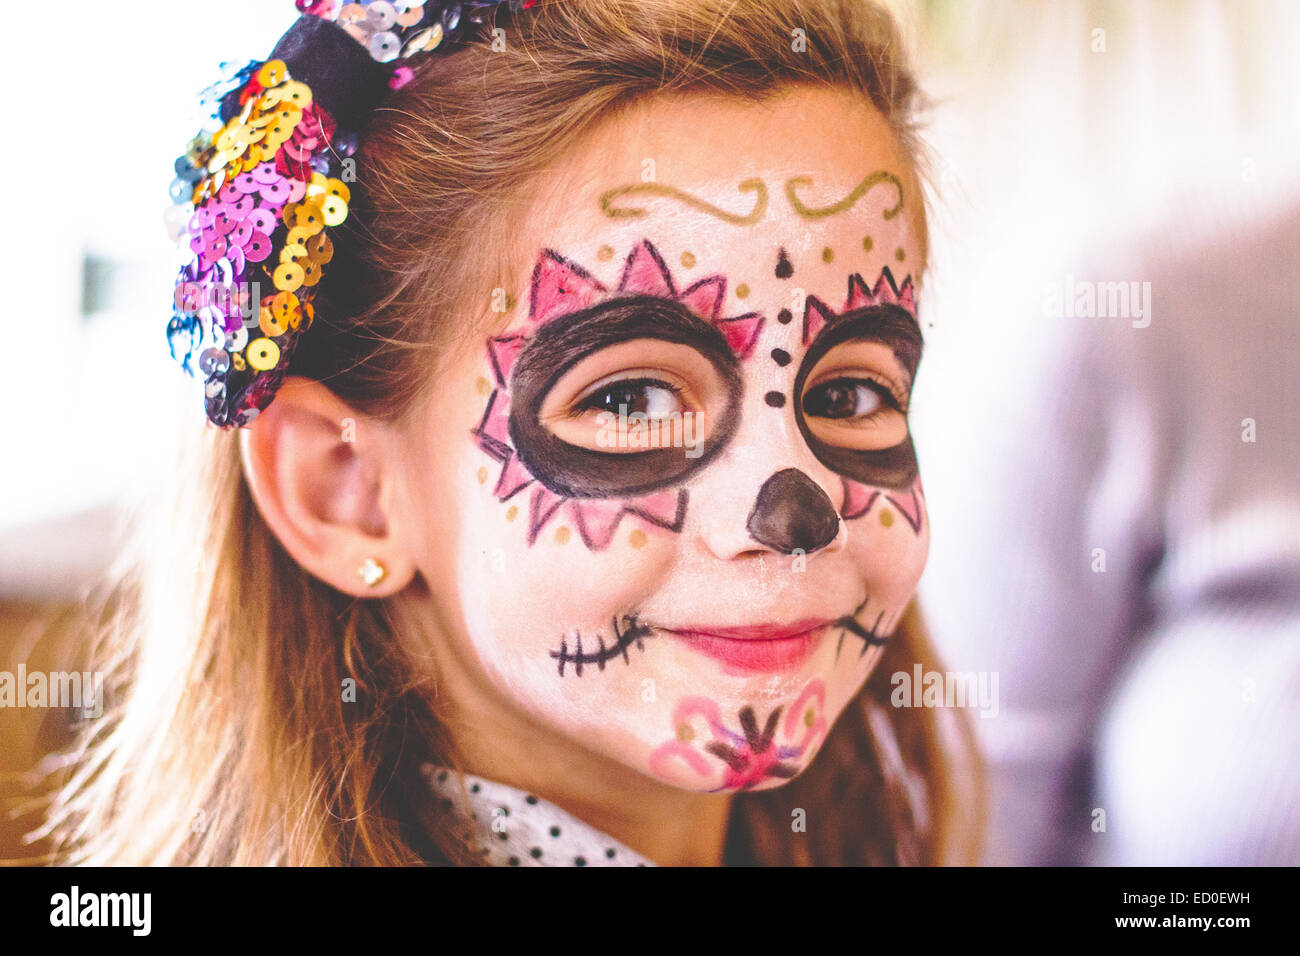 Portrait of a smiling girl with skull face paint Stock Photo - Alamy